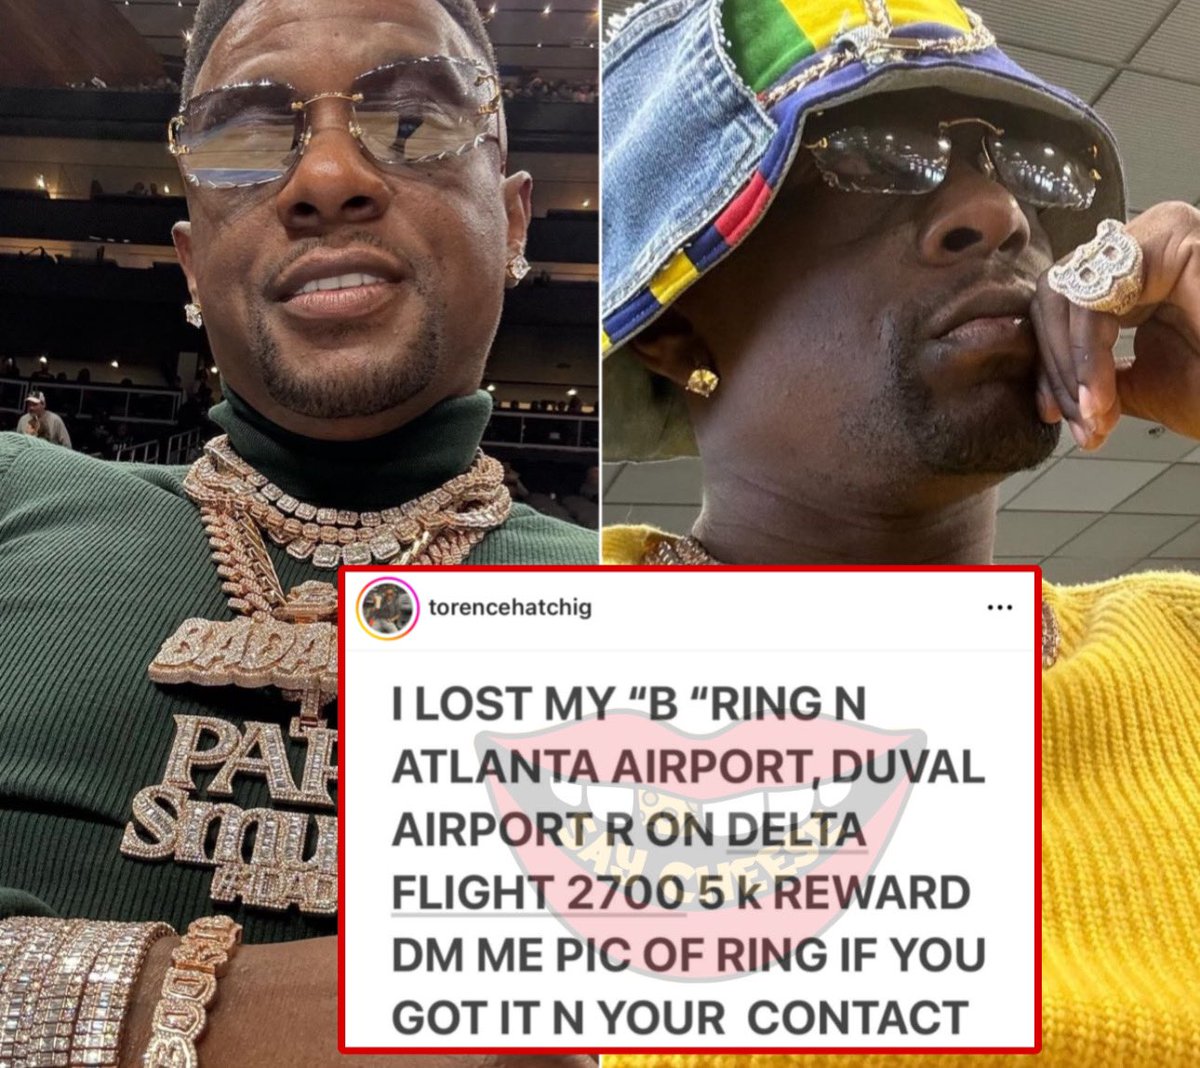 Boosie has offered a $5,000 reward for anyone who returns his lost ring